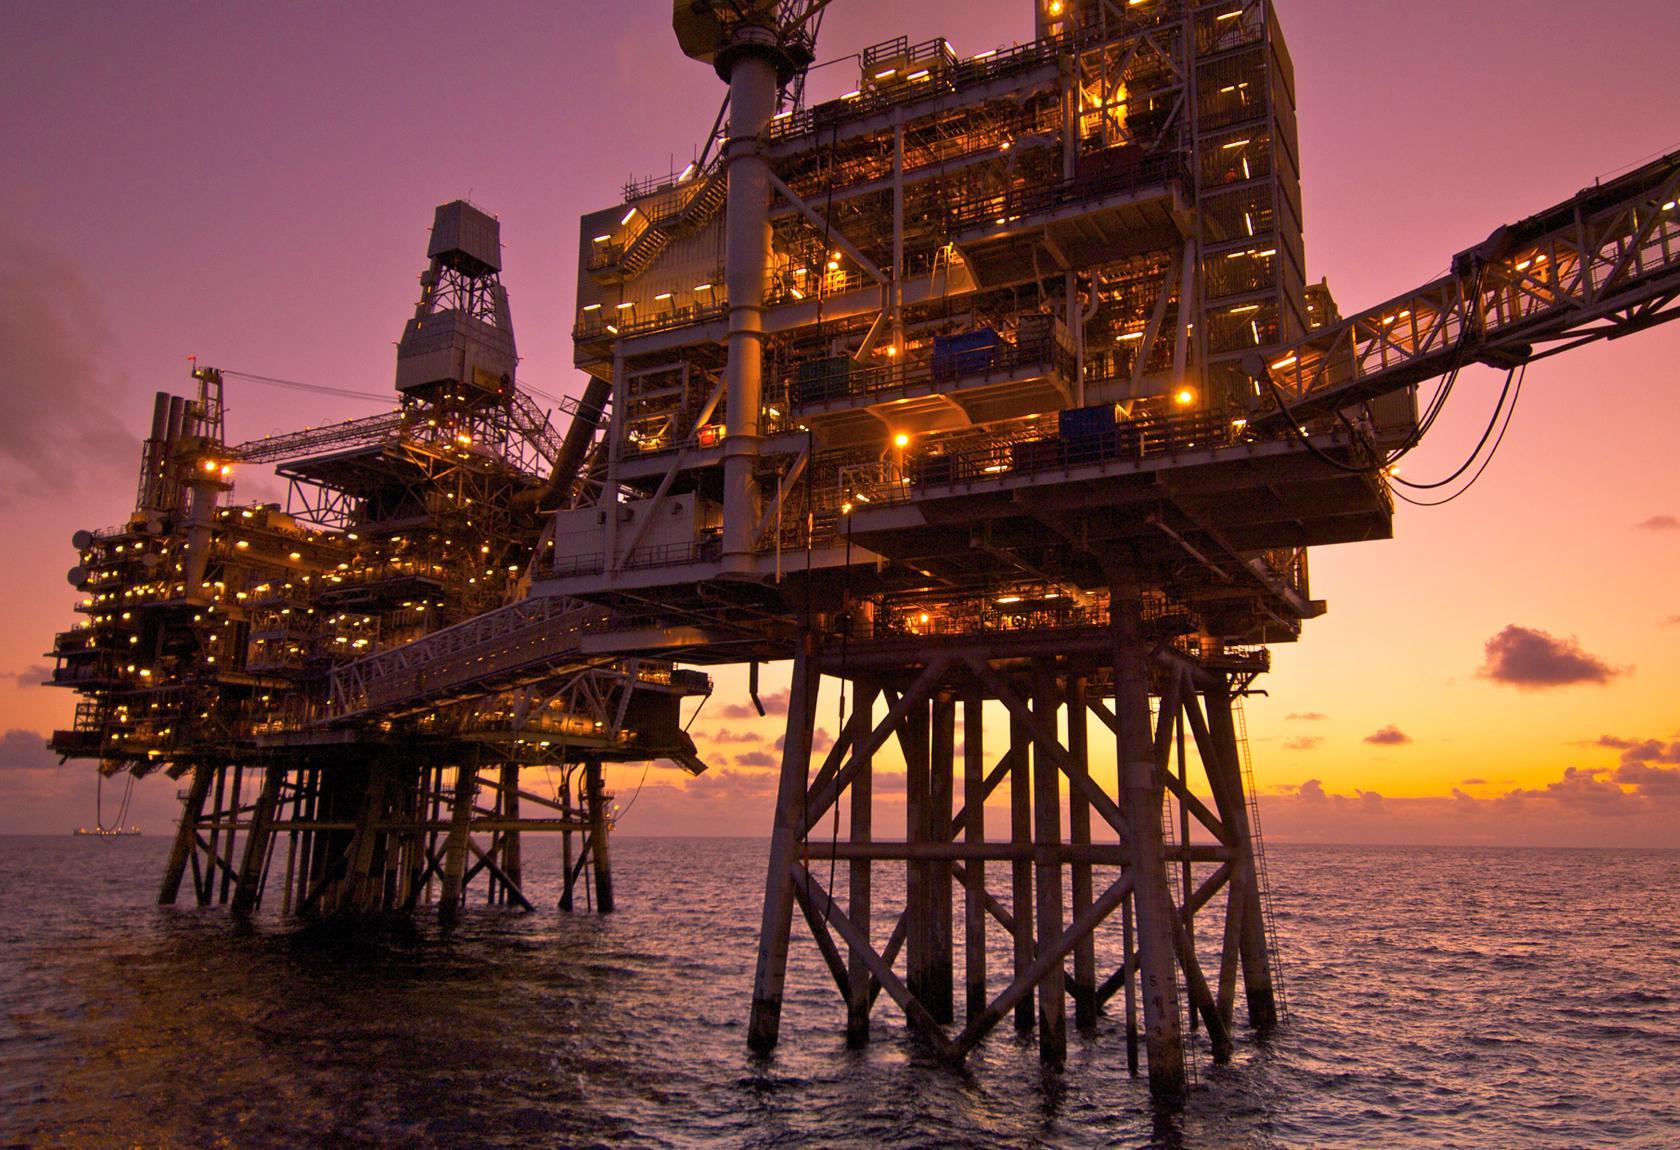 North Sea oil and gas has been hit by a slowdown in recent years